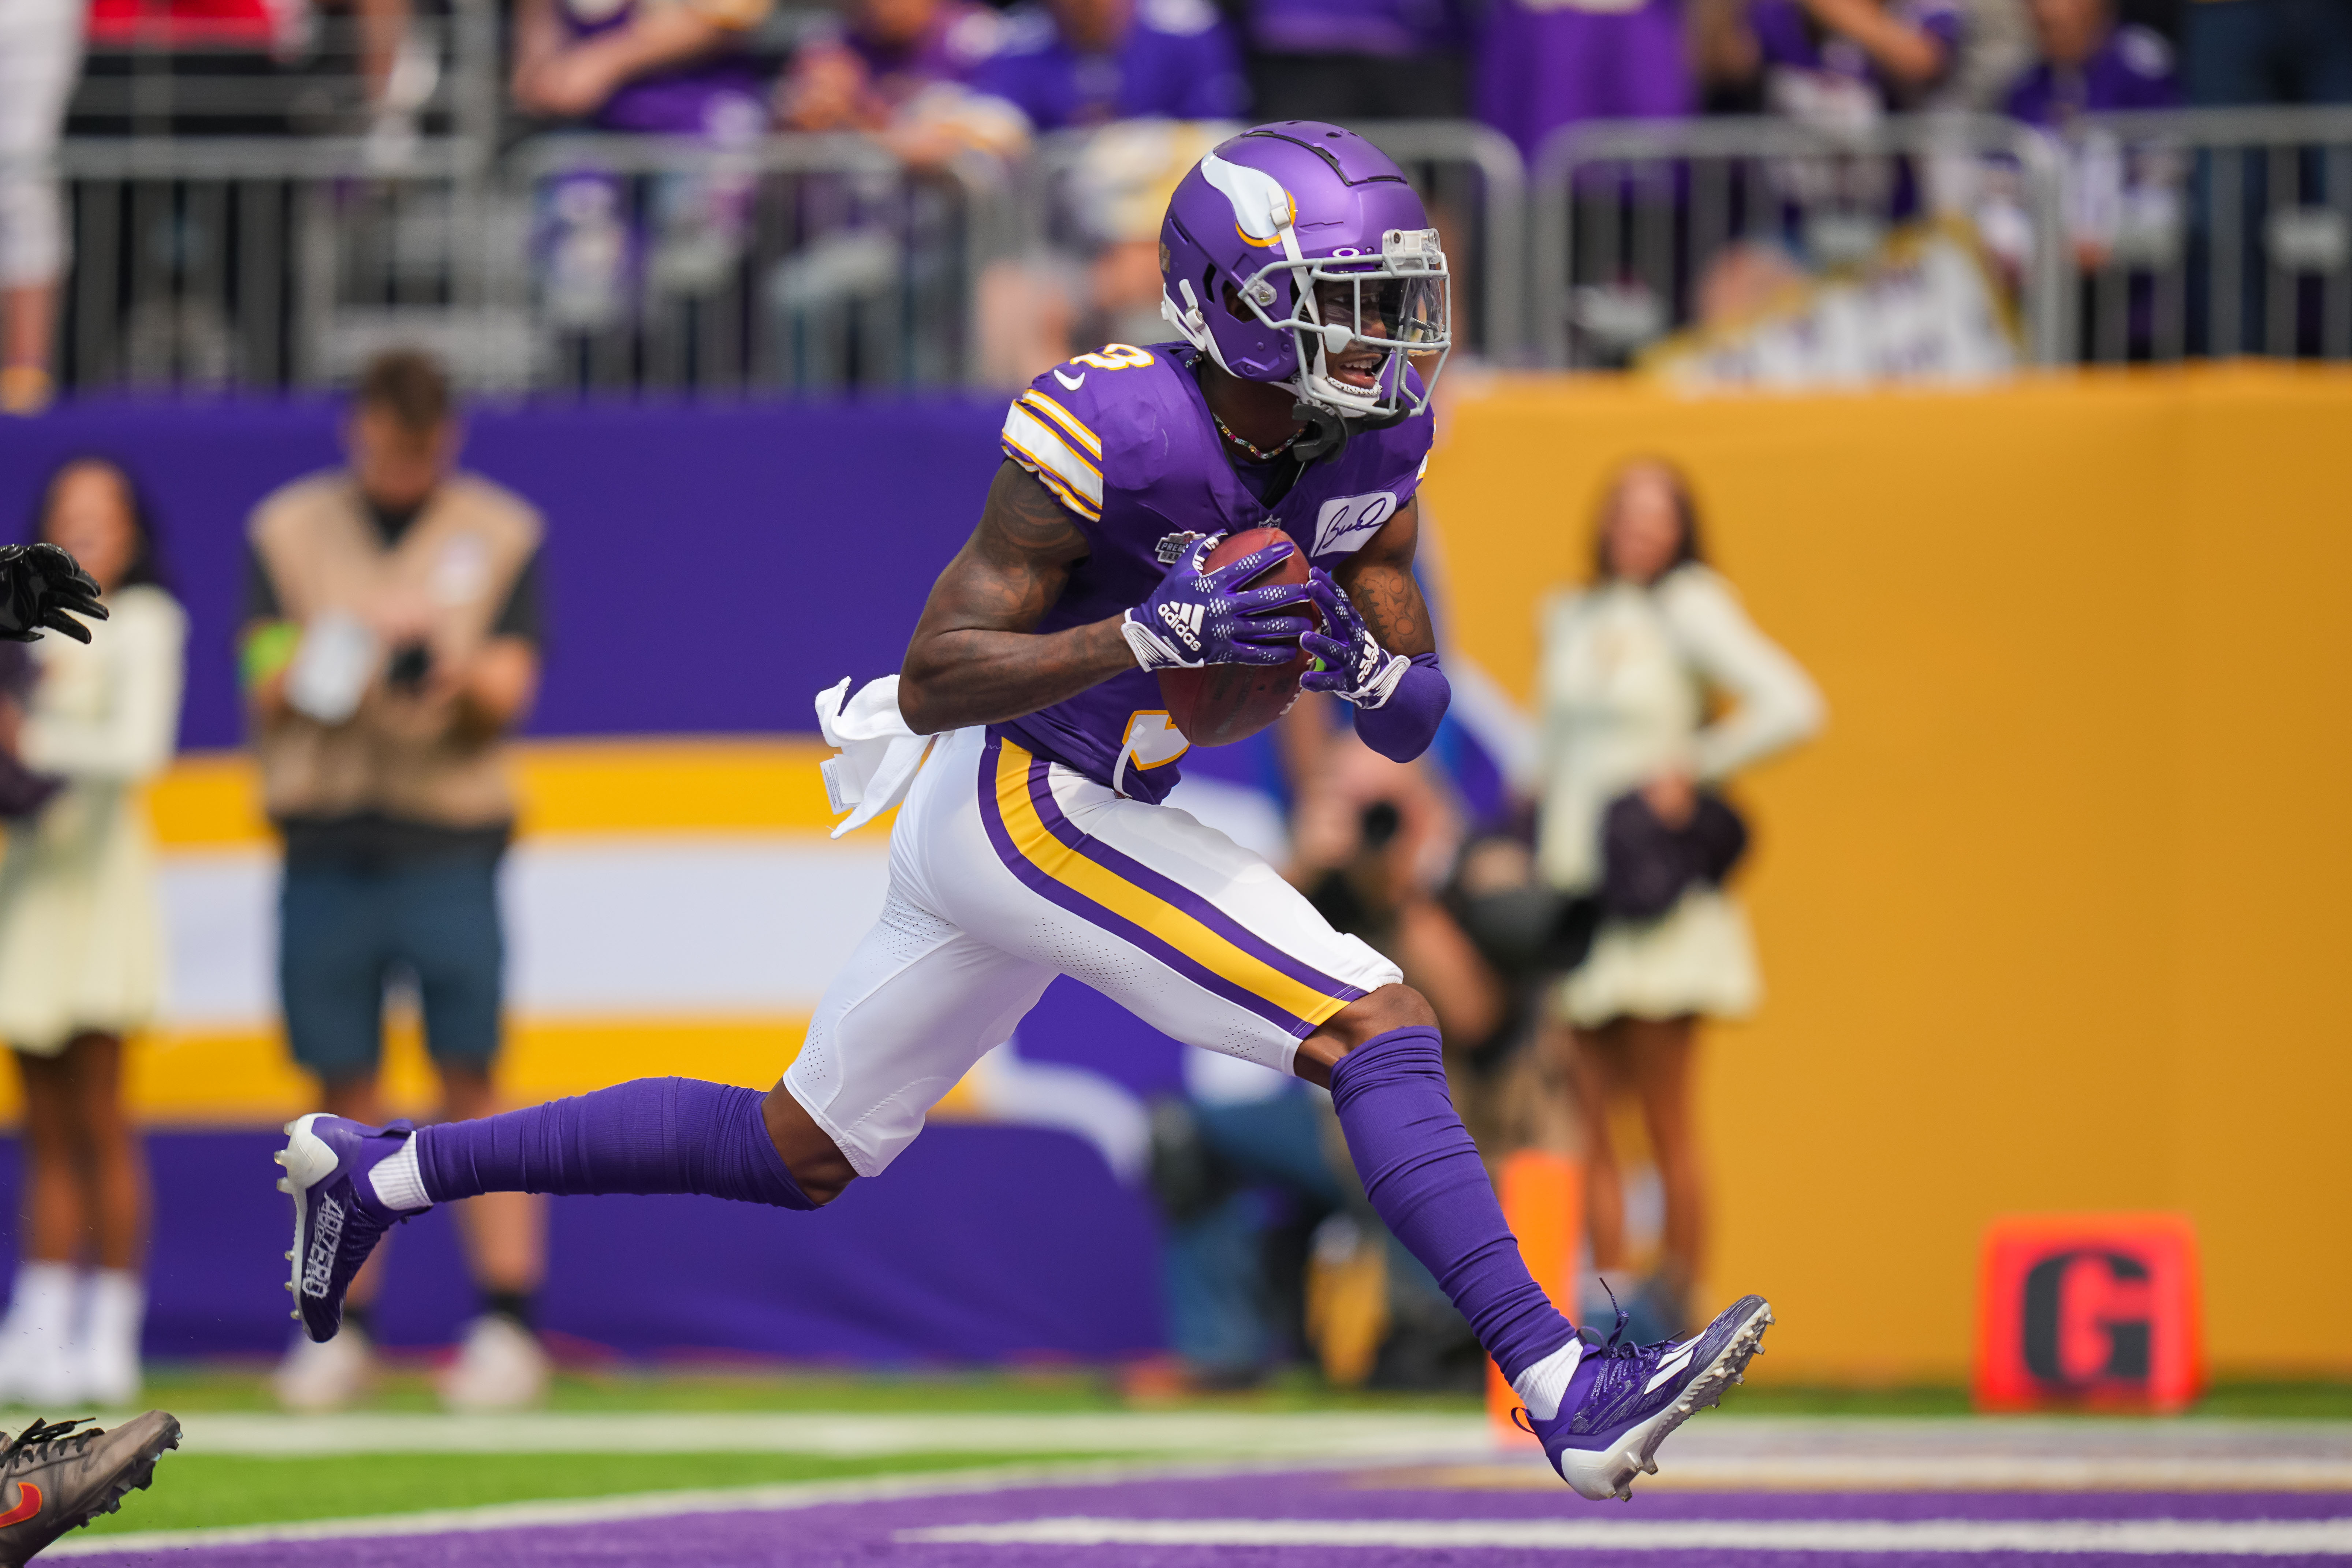 4 Silver Linings for the Vikings Despite Their Disappointing Loss